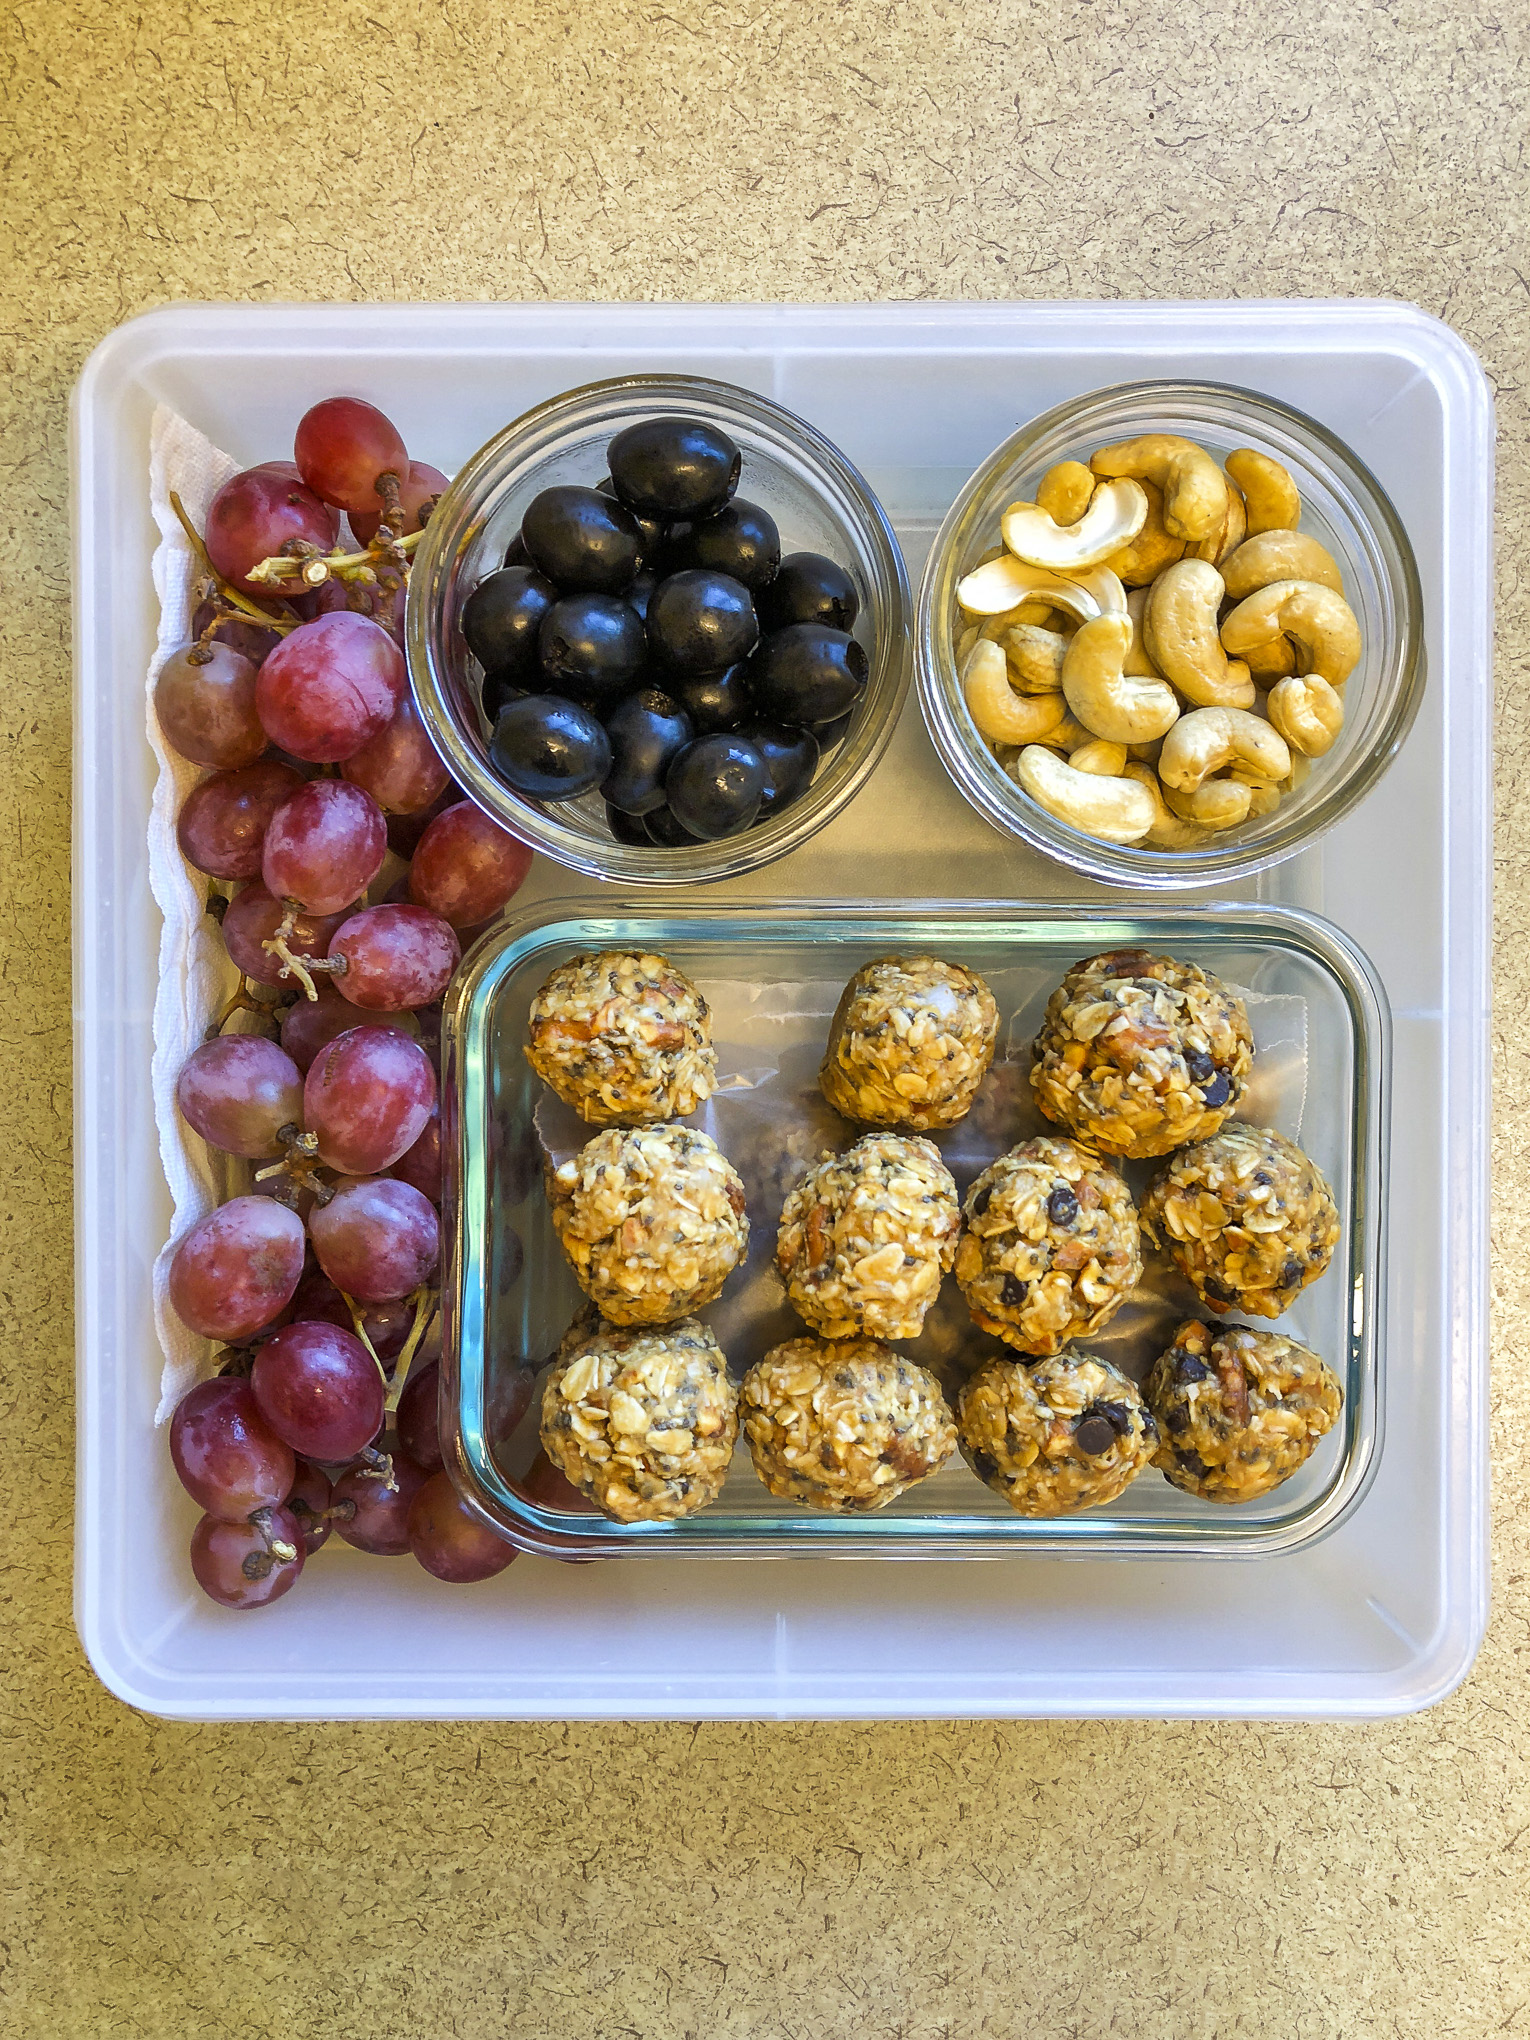 Tupperware filled with olives, cashews, energy bites and grapes